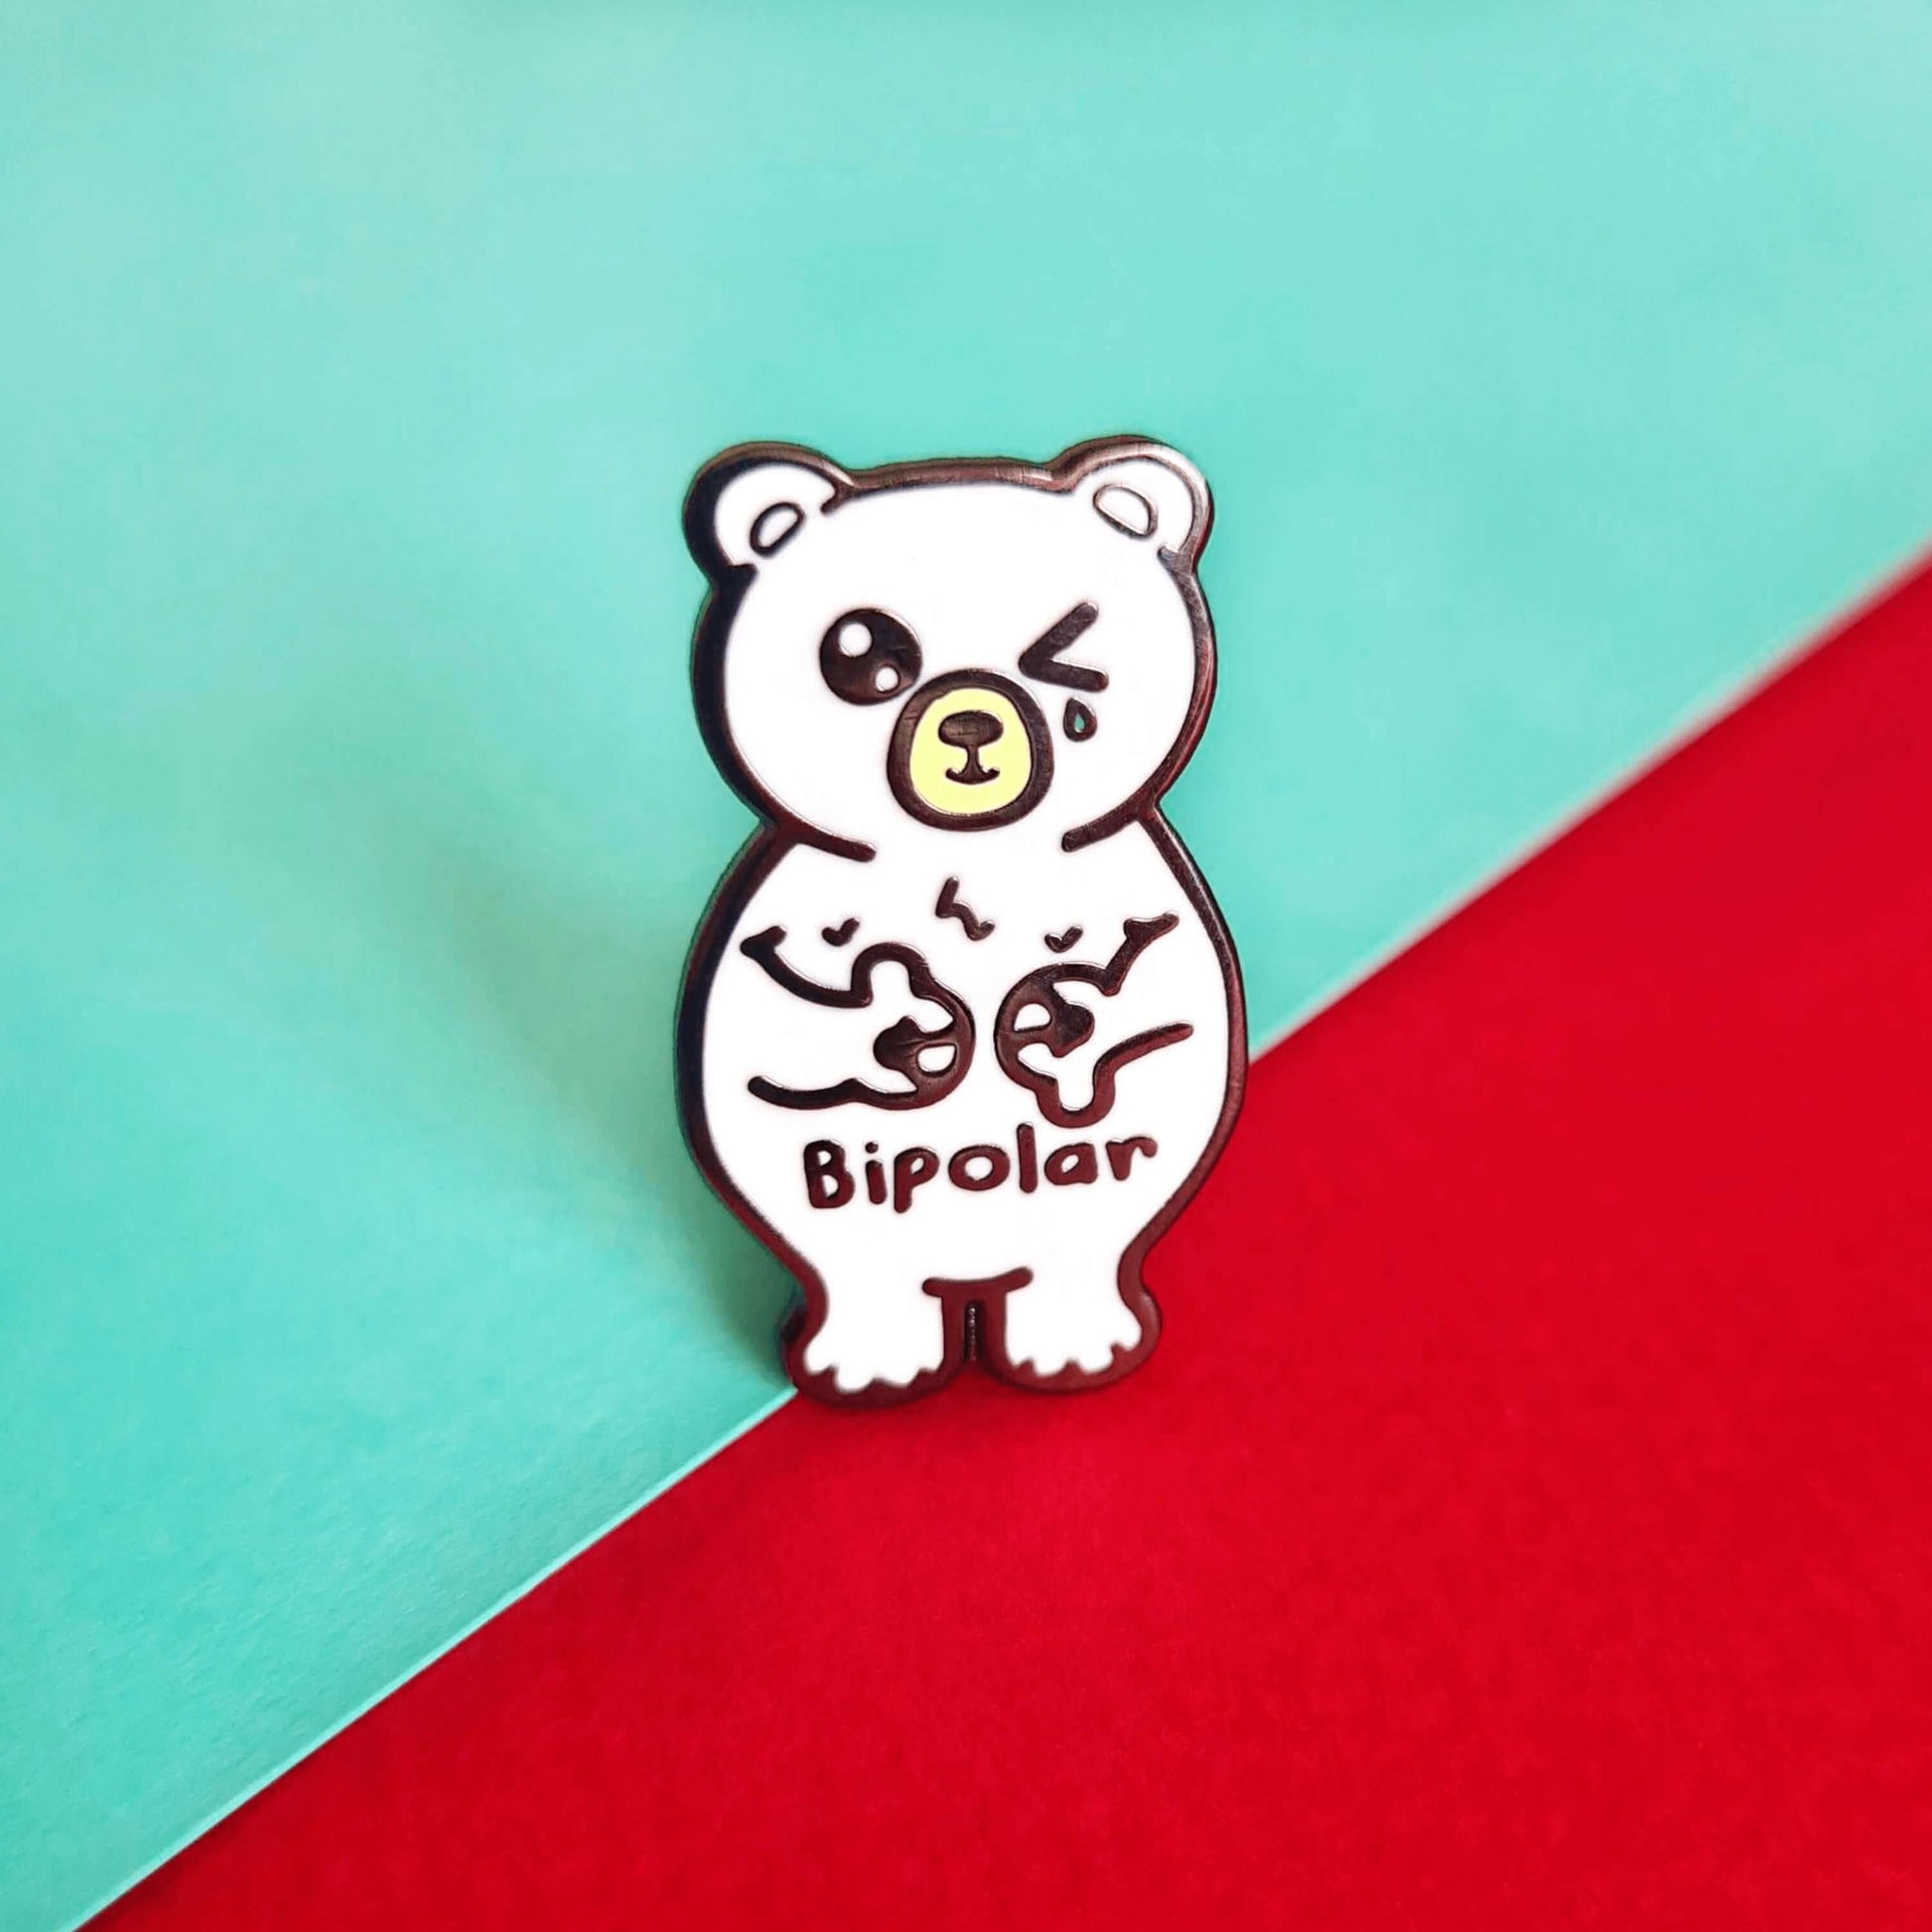 Bipolar Bear Enamel Pin - Bipolar on a red and blue background. The pin is a white polar bear with one eye closed crying whilst smiling clutching its chest, across its tummy reads bipolar. The pun pin is raising awareness for bipolar disorder.